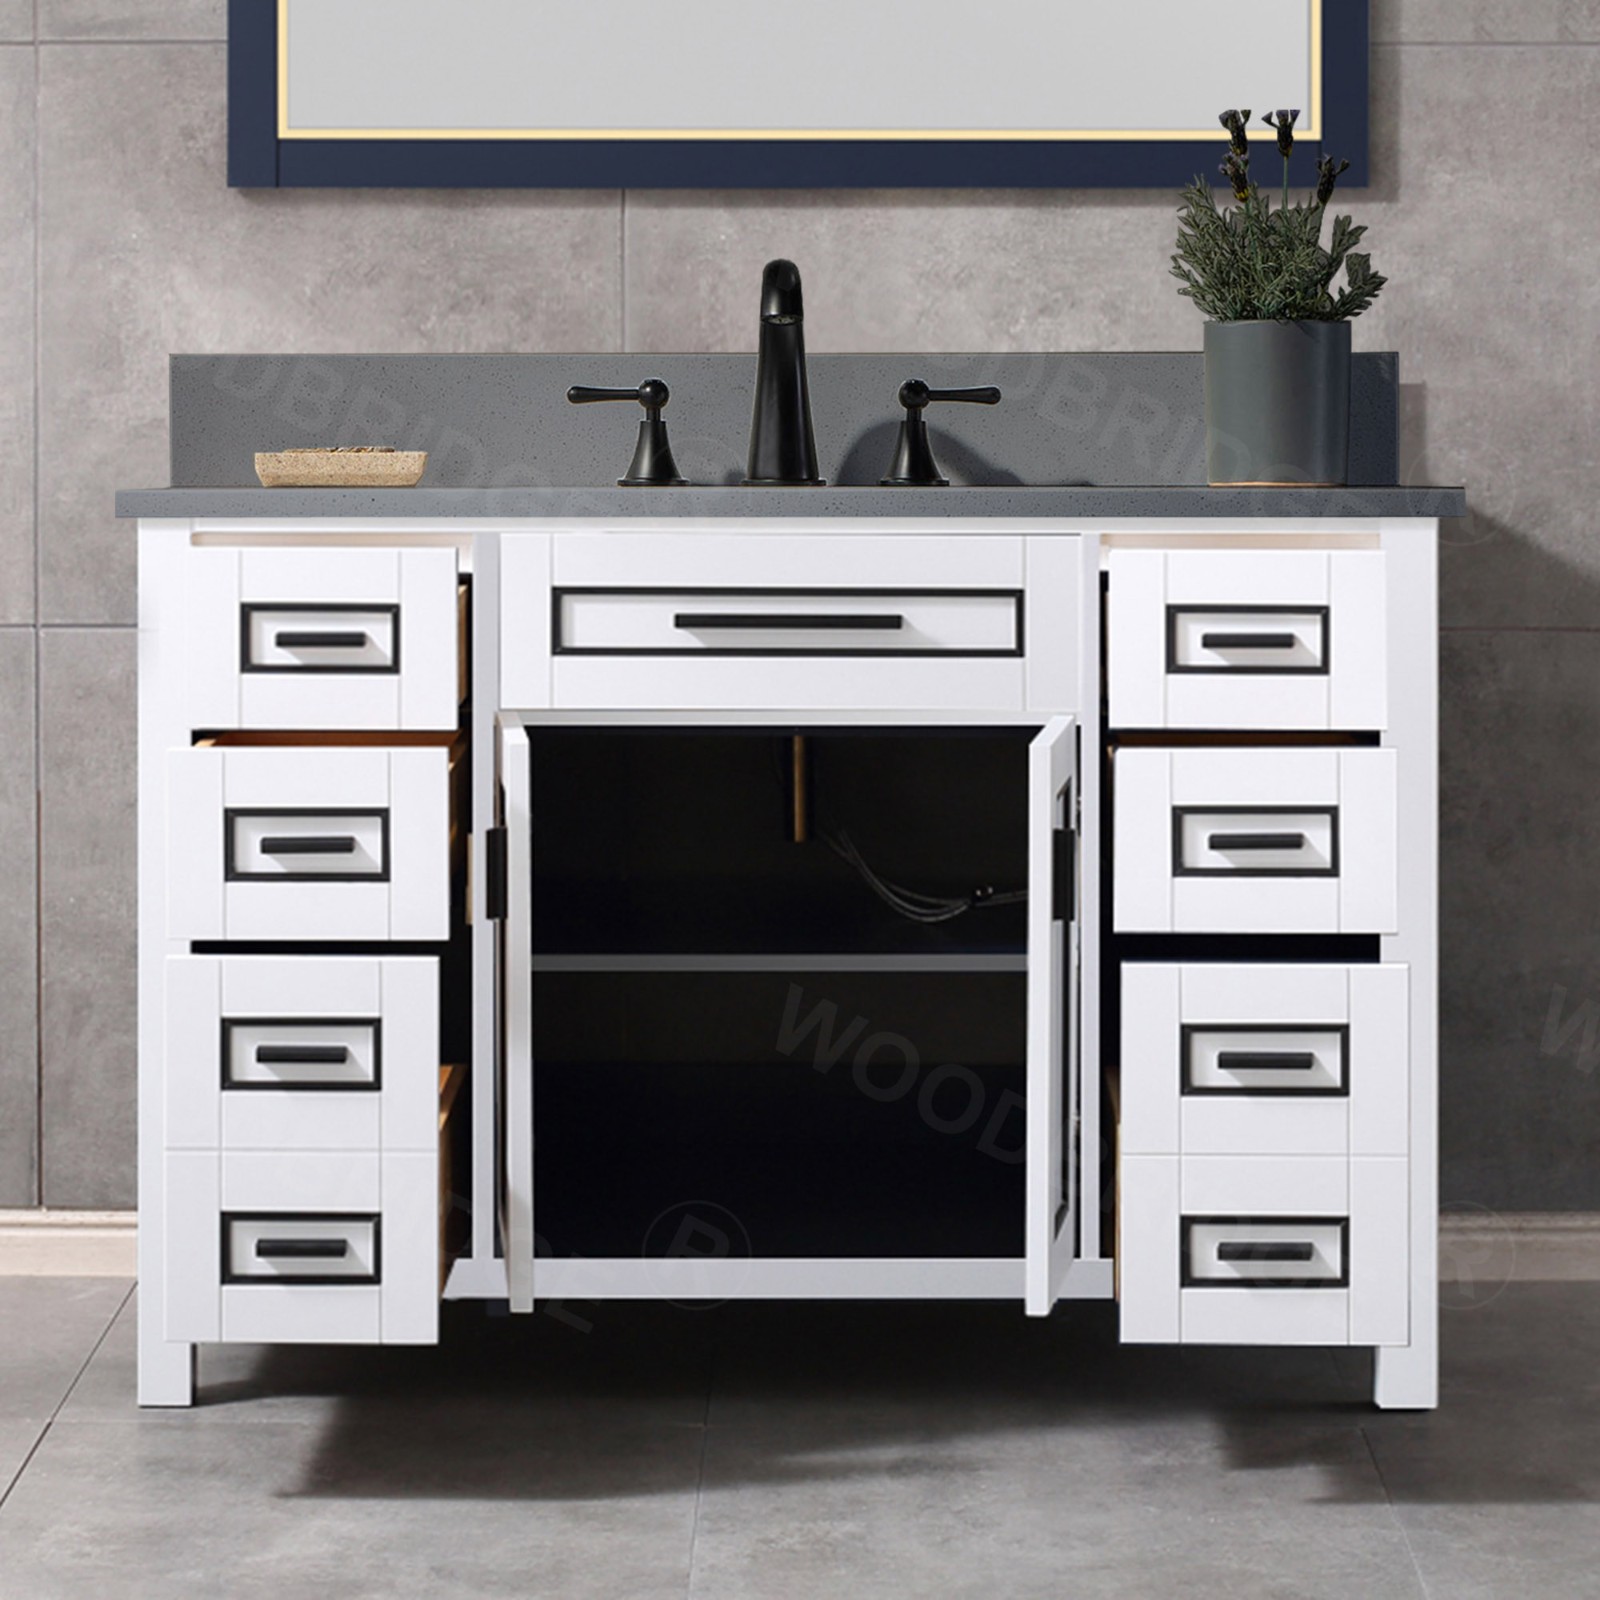  WOODBRIDGE Milan  49” Floor Mounted Single Basin Vanity Set with Solid Wood Cabinet in White and Engineered stone composite Vanity Top in Dark Gray with Pre-installed Undermount Rectangle Bathroom Sink in White and Pre-Drilled 3-Hole for 8” Widespread Fau_4685